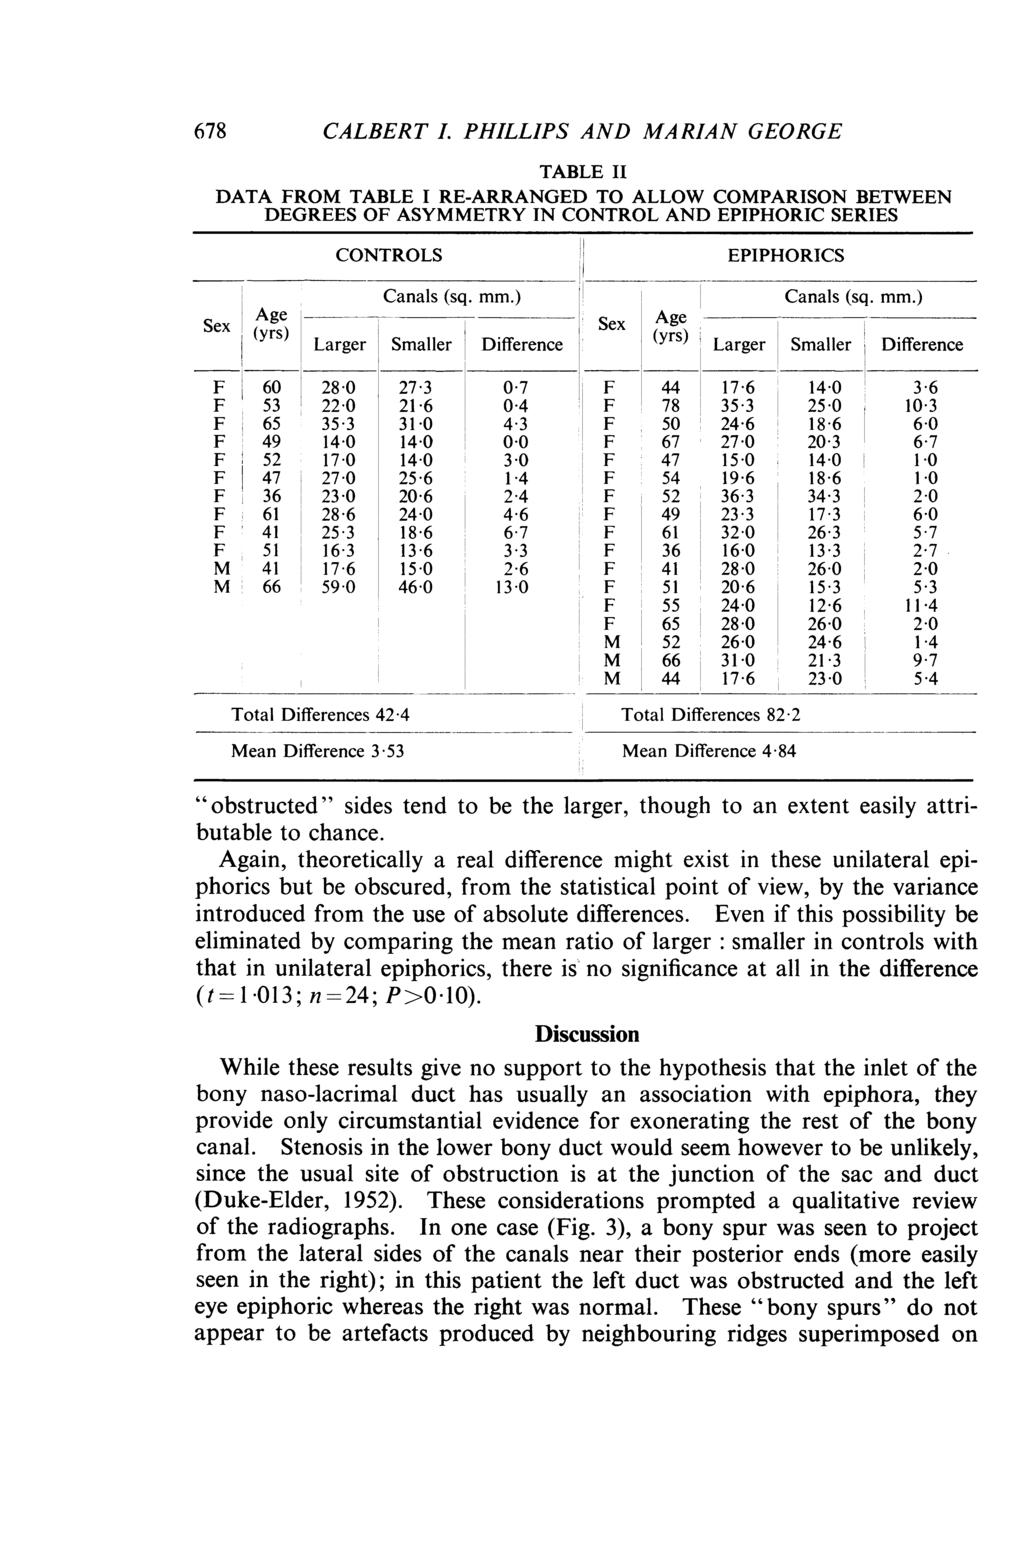 678 CALBERT L PHILLIPS AND MARIAN GEORGE TABLE II DATA FROM TABLE I RE-ARRANGED TO ALLOW COMPARISON BETWEEN DEGREES OF ASYMMETRY IN CONTROL AND EPIPHORIC SERIES Sex Sx (yrs) Age F 60 F 53 F 65 F 49 F